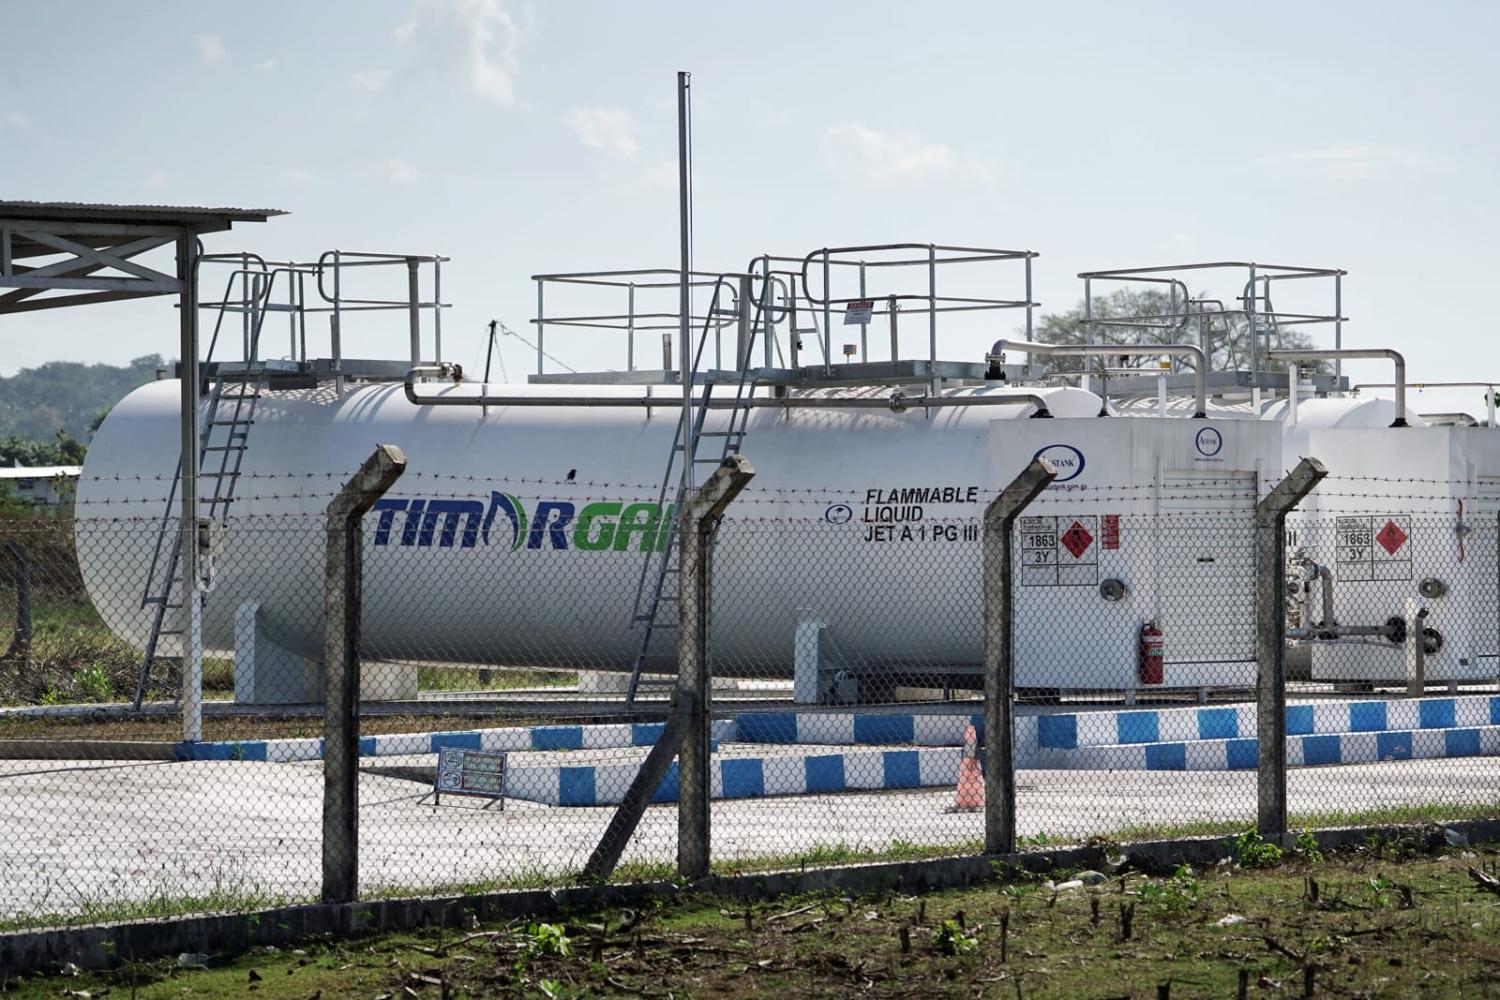 Fuel storage tanks stand in Suai, Timor-Leste, part of the southern region the country hopes to develop as an industrial zone (Dimas Ardian/Bloomberg via Getty Images)